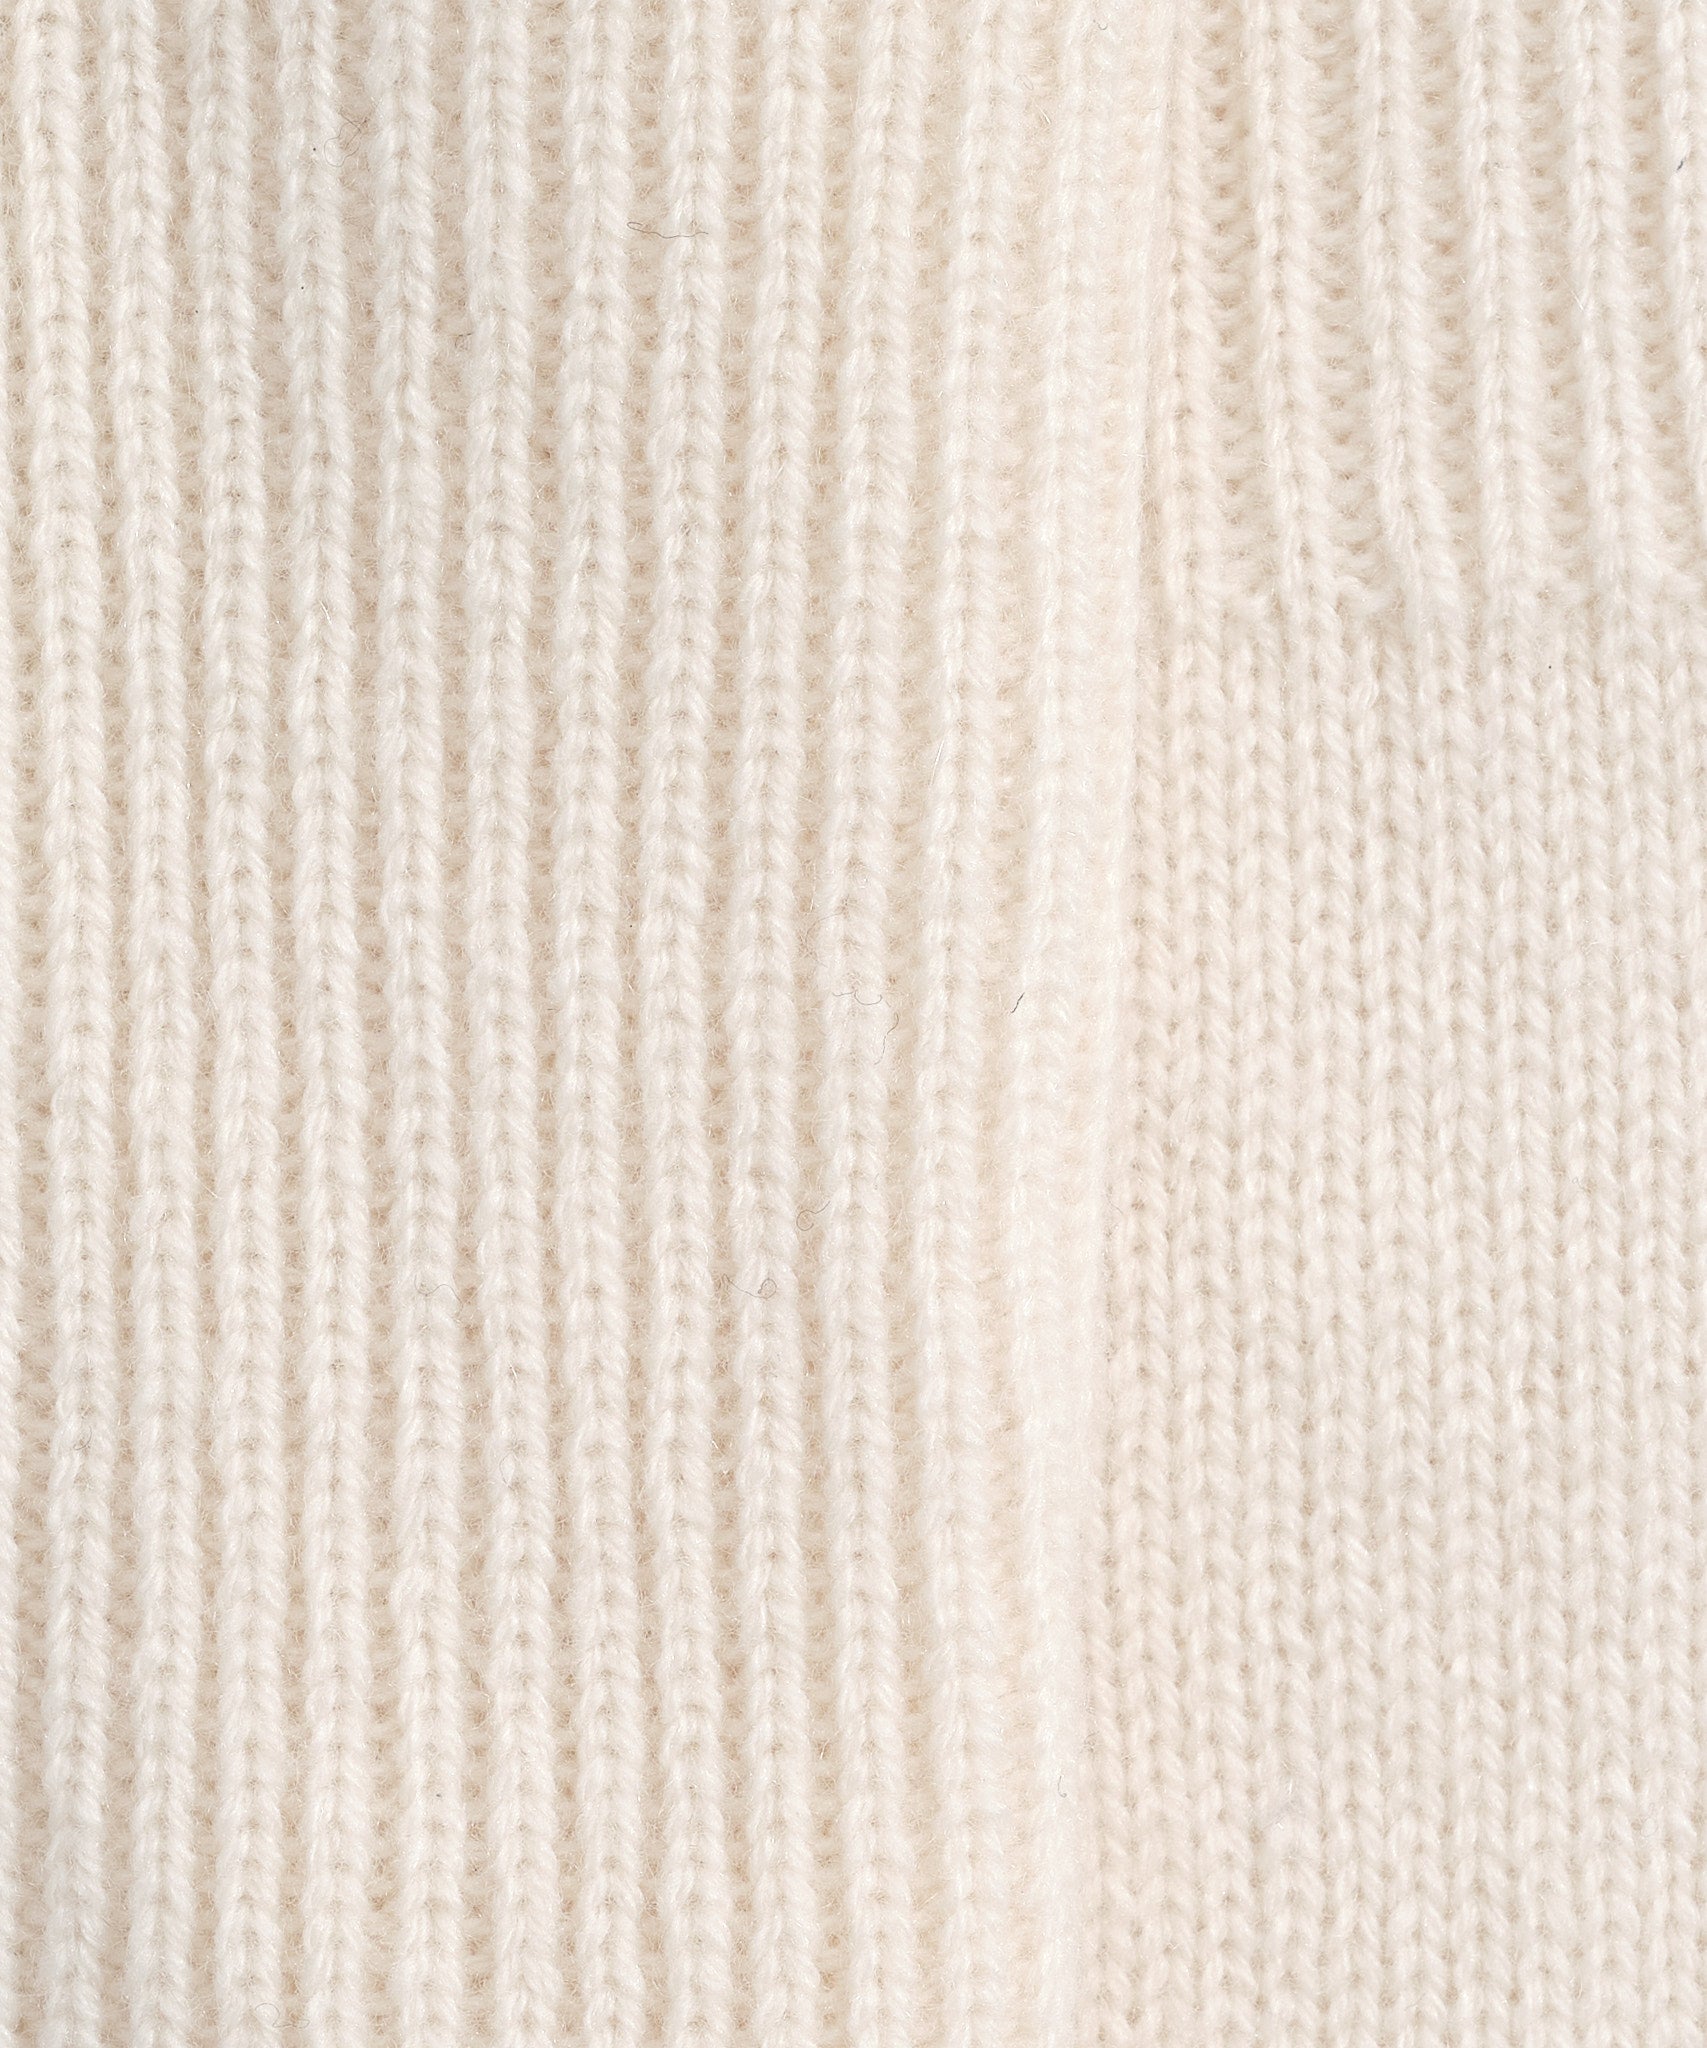 Wool/Cashmere  Gloves in color Cream